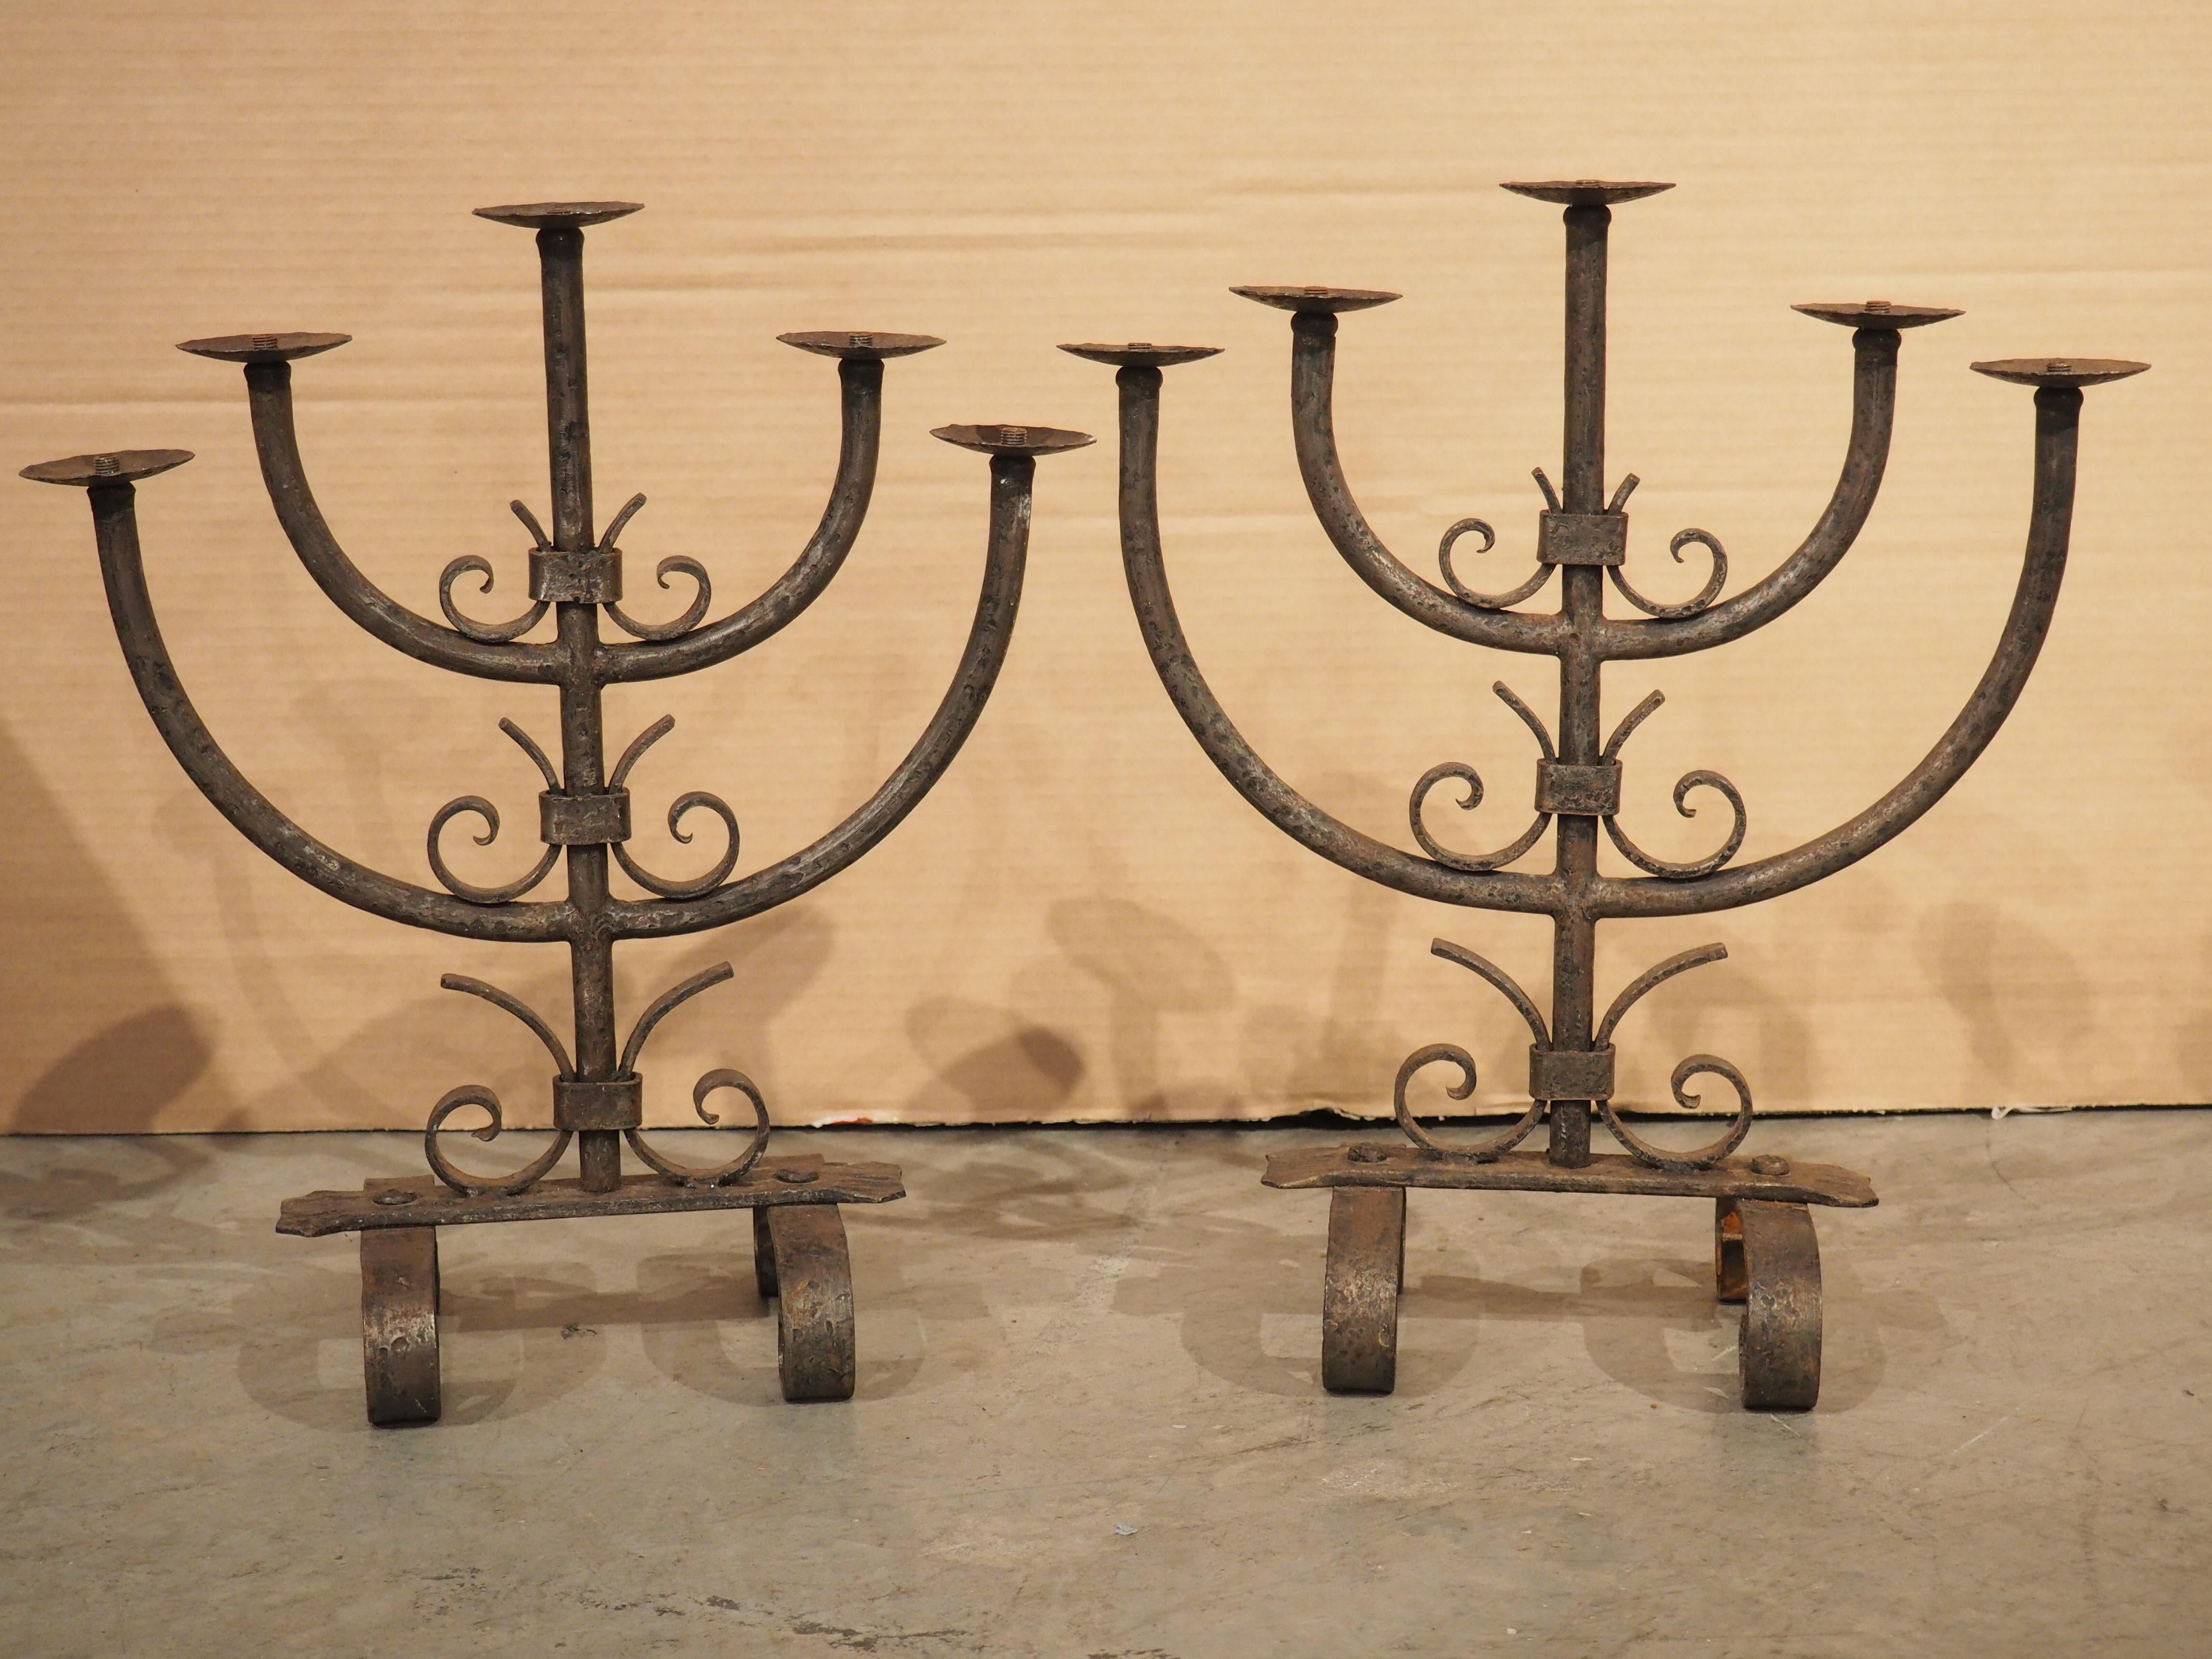 Wrought iron is tough, yet malleable, allowing the metal to be worked into elaborate scrolls and other sinuous motifs. This pair of wrought iron candelabras from Bordeaux, France (circa 1900), features two demi-lune arms and several bracketed